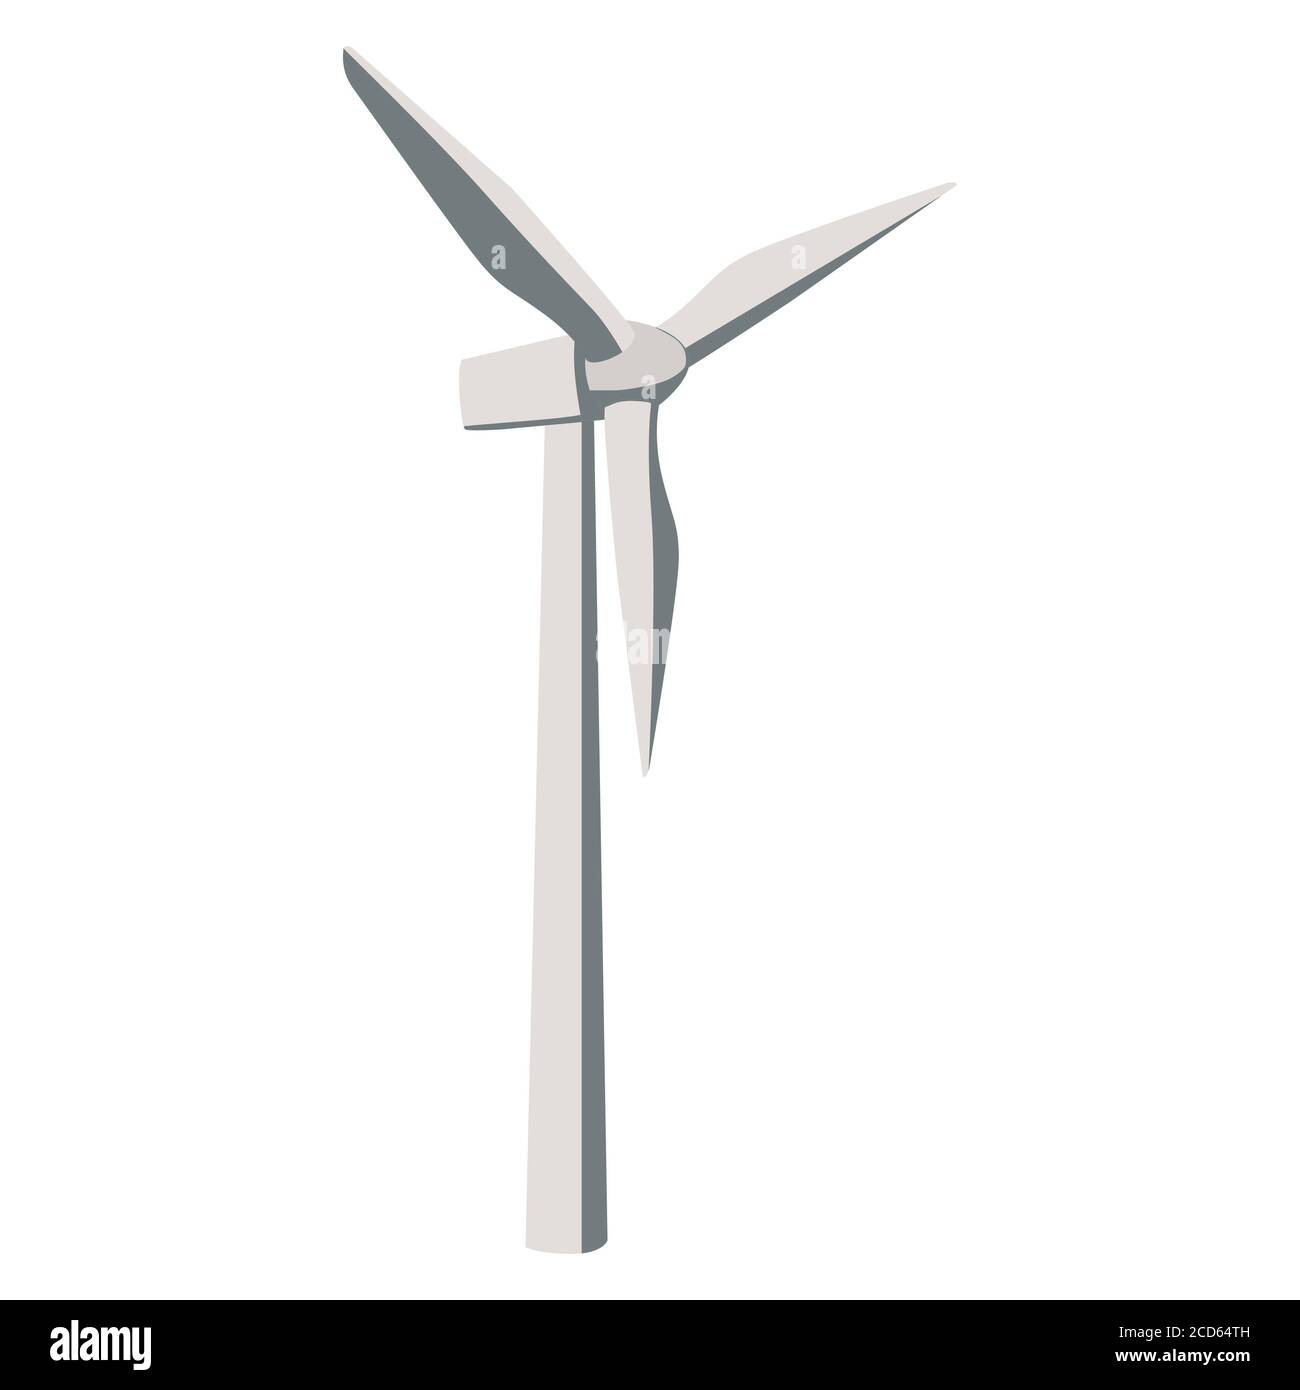 Wind farm in cartoon style isolated on white. Windmill with three blades on  a high mast. Alternative renewable wind energy. Vector EPS 10 Stock Photo -  Alamy